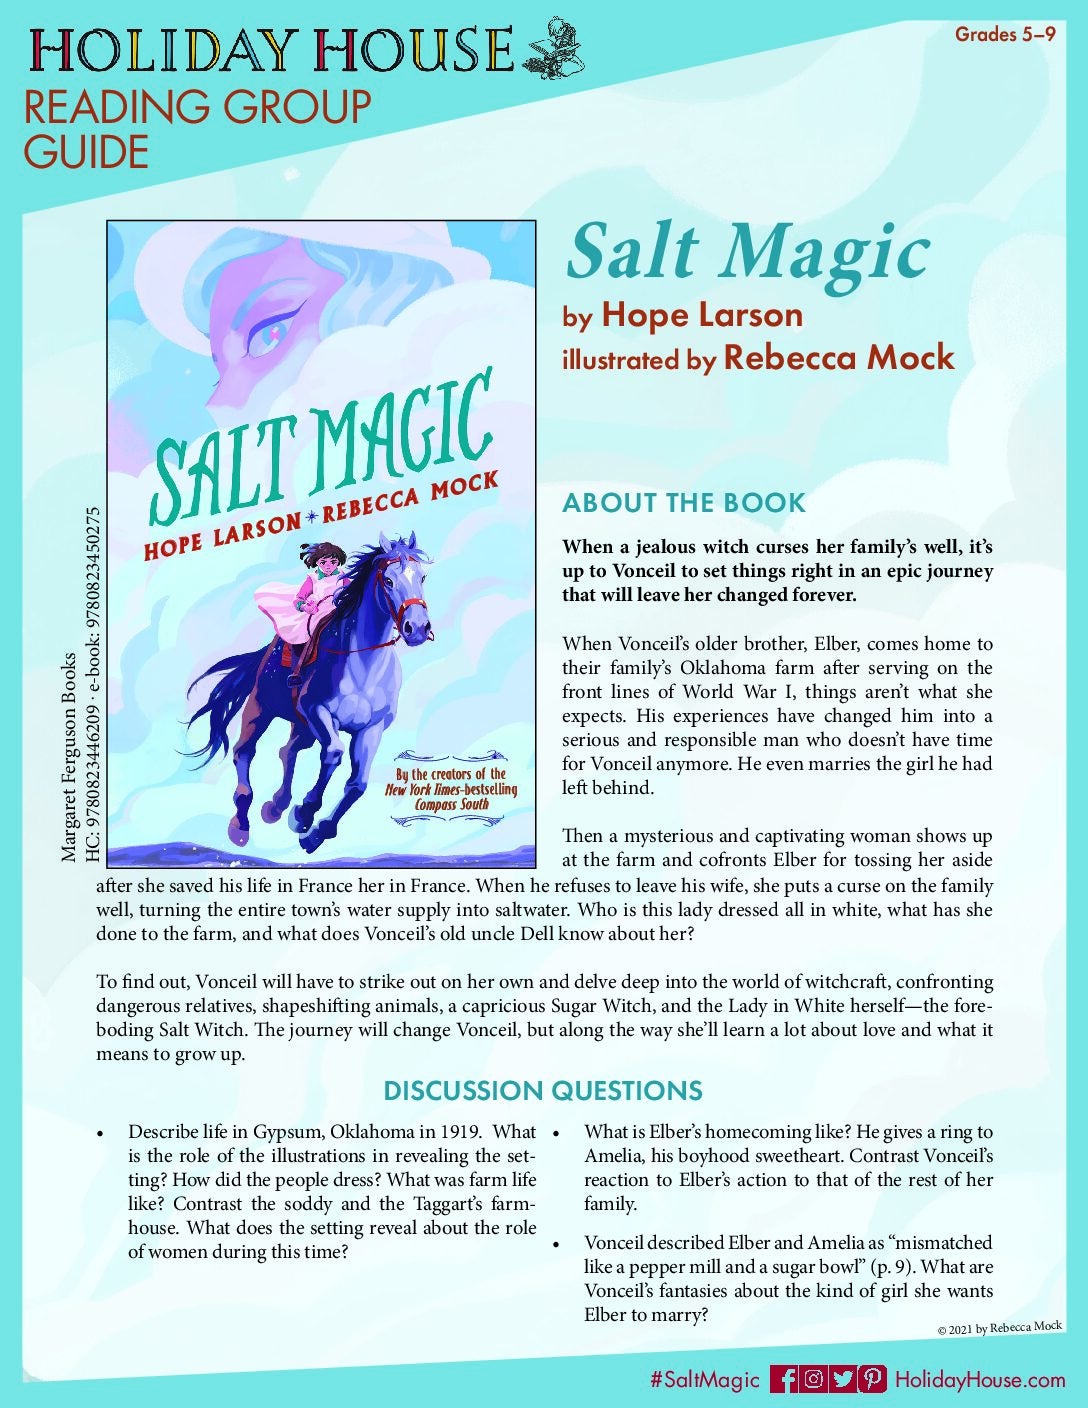 Salt Magic – Reading Group Guide cover